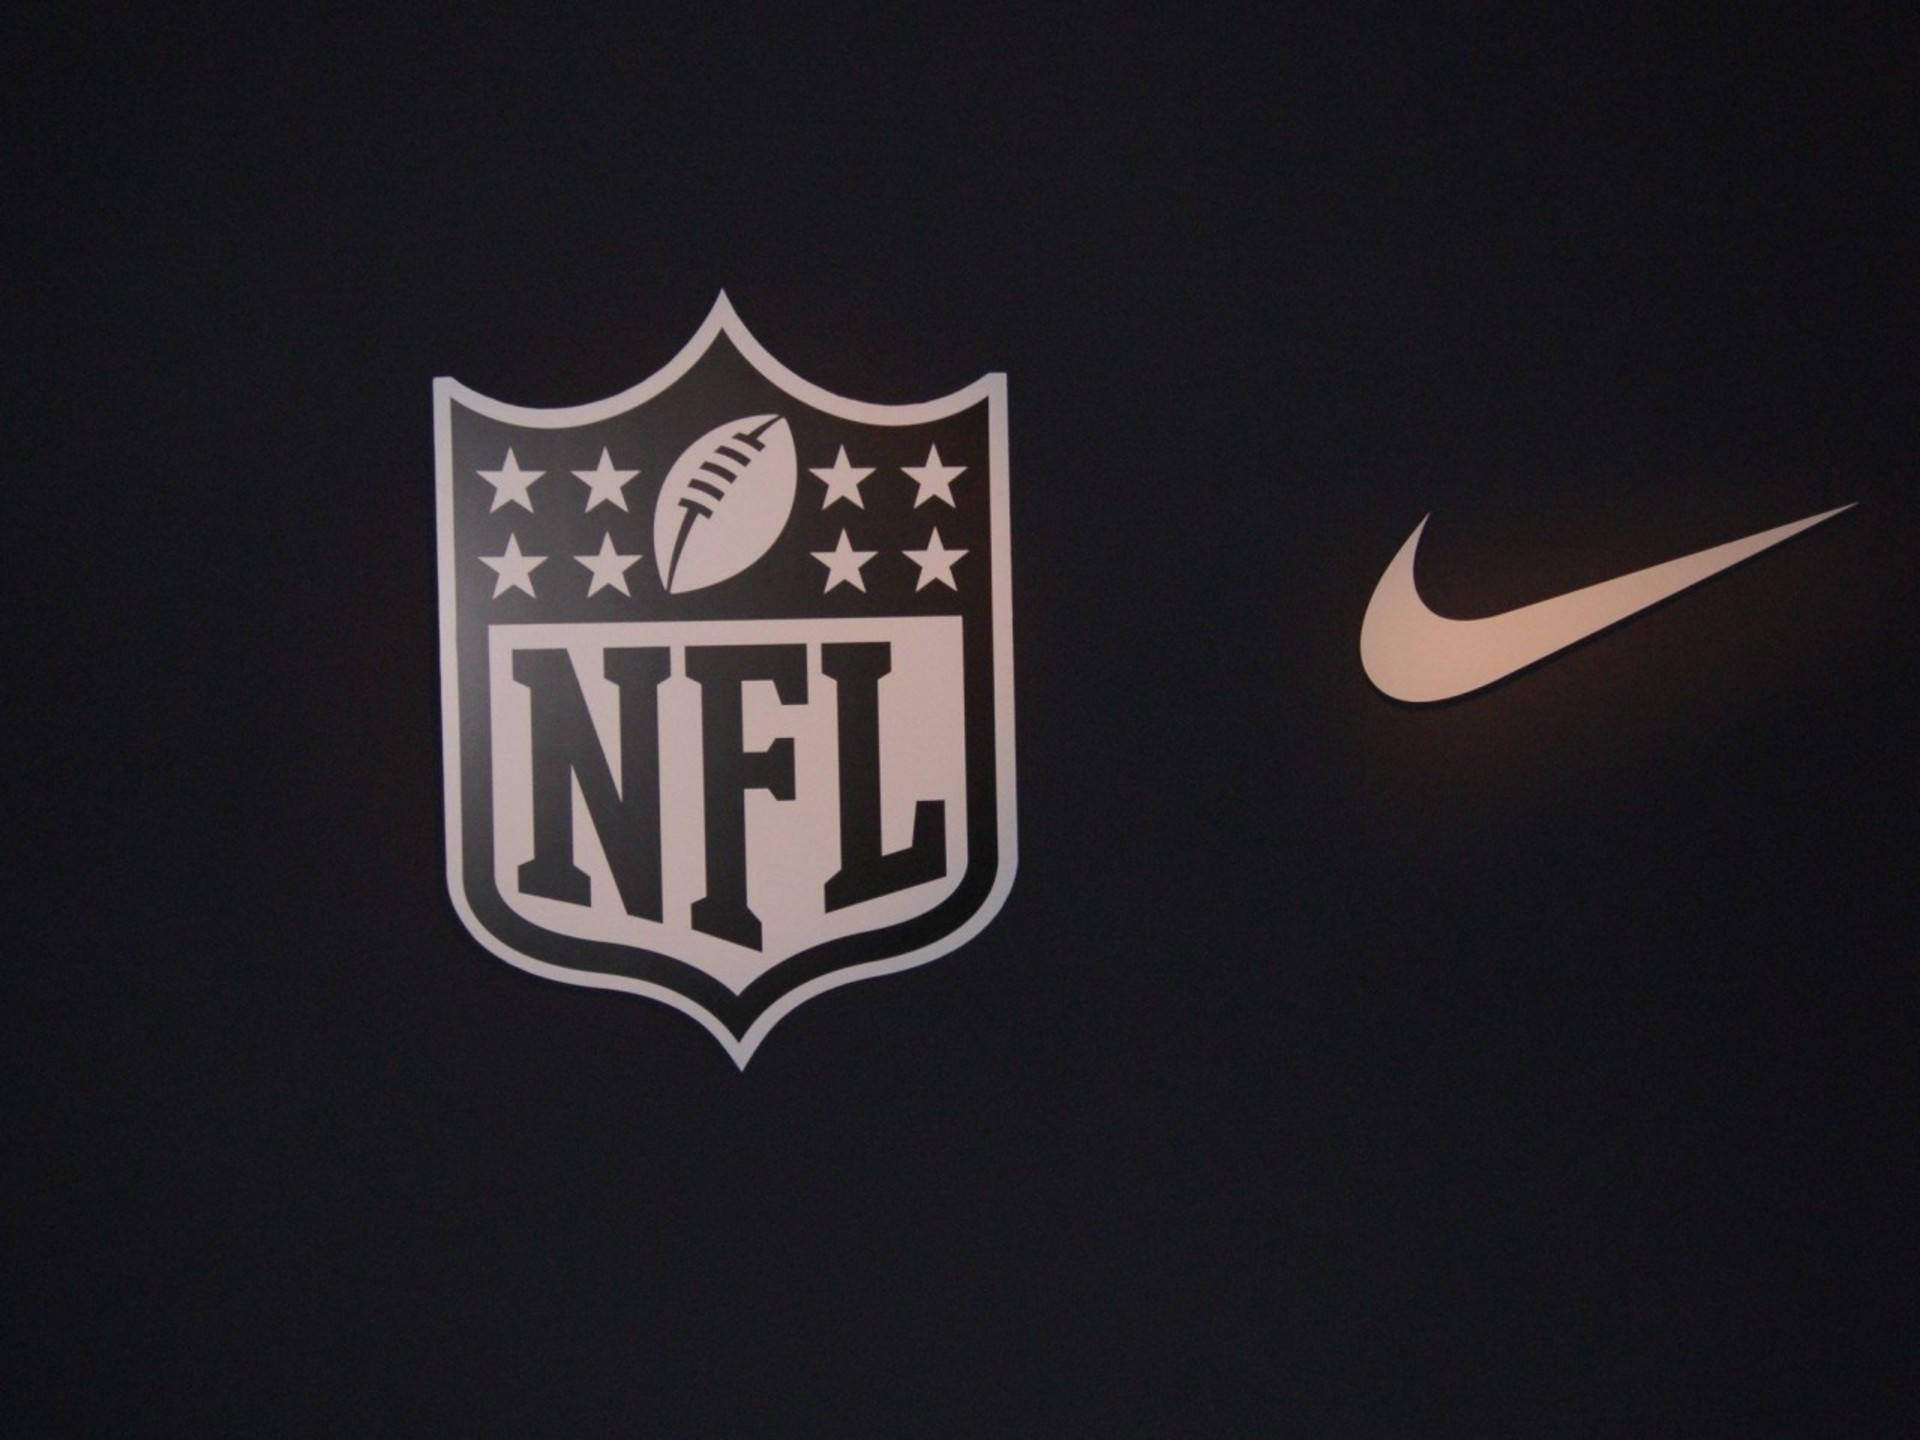 Nfl Football And Nike Logos Background